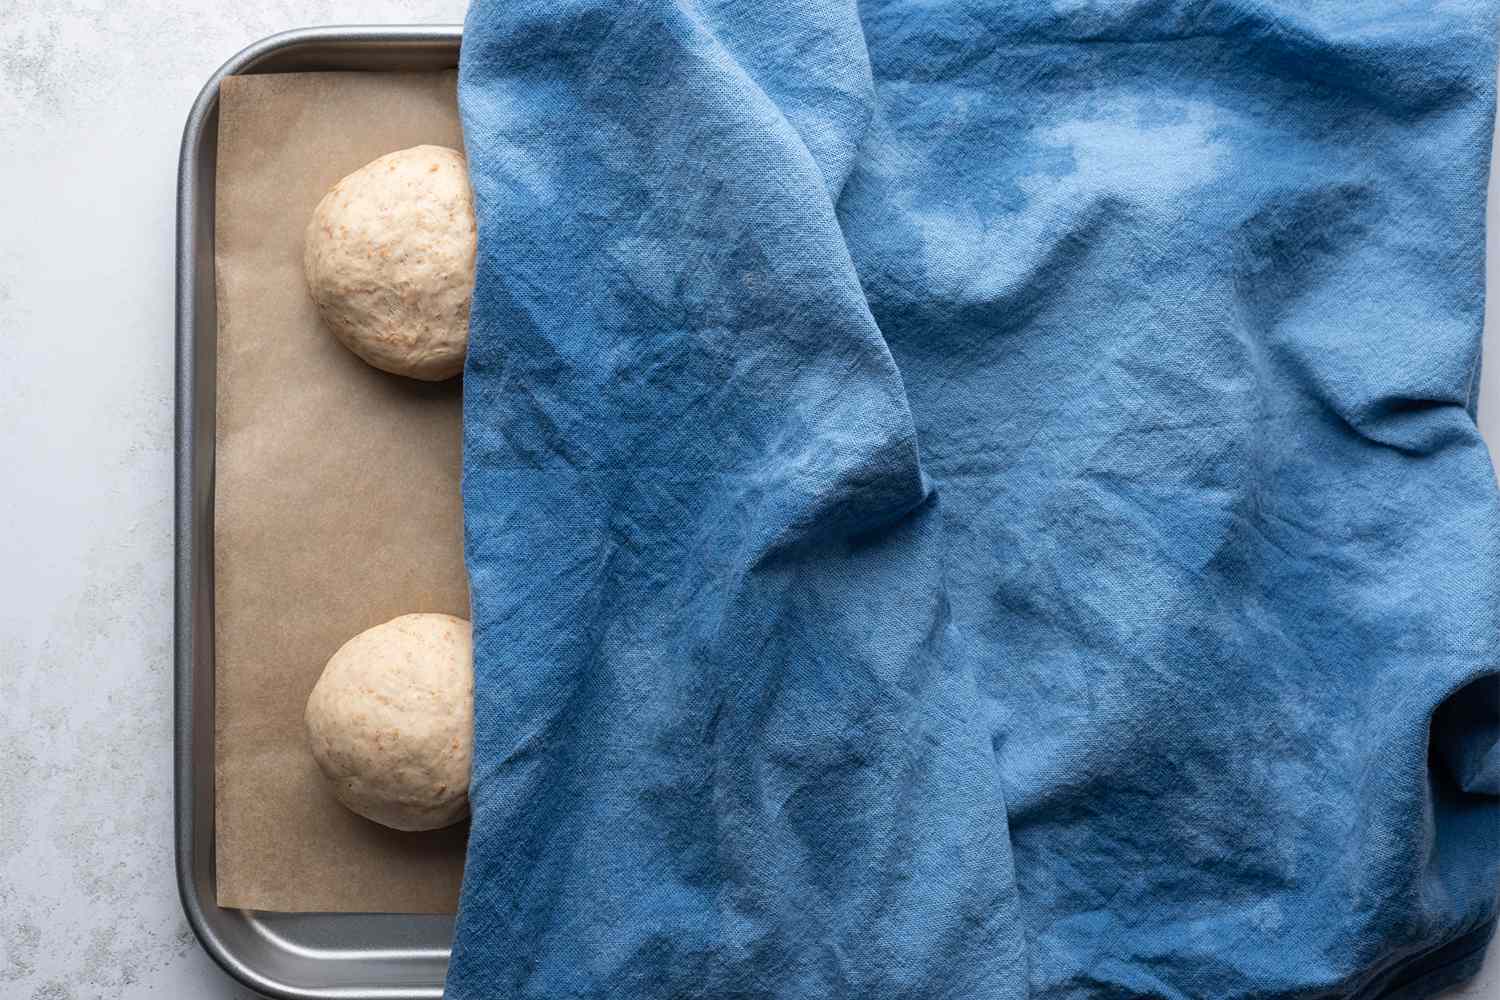 Dough balls on a parchment paper lined baking sheet, covered with a towel 